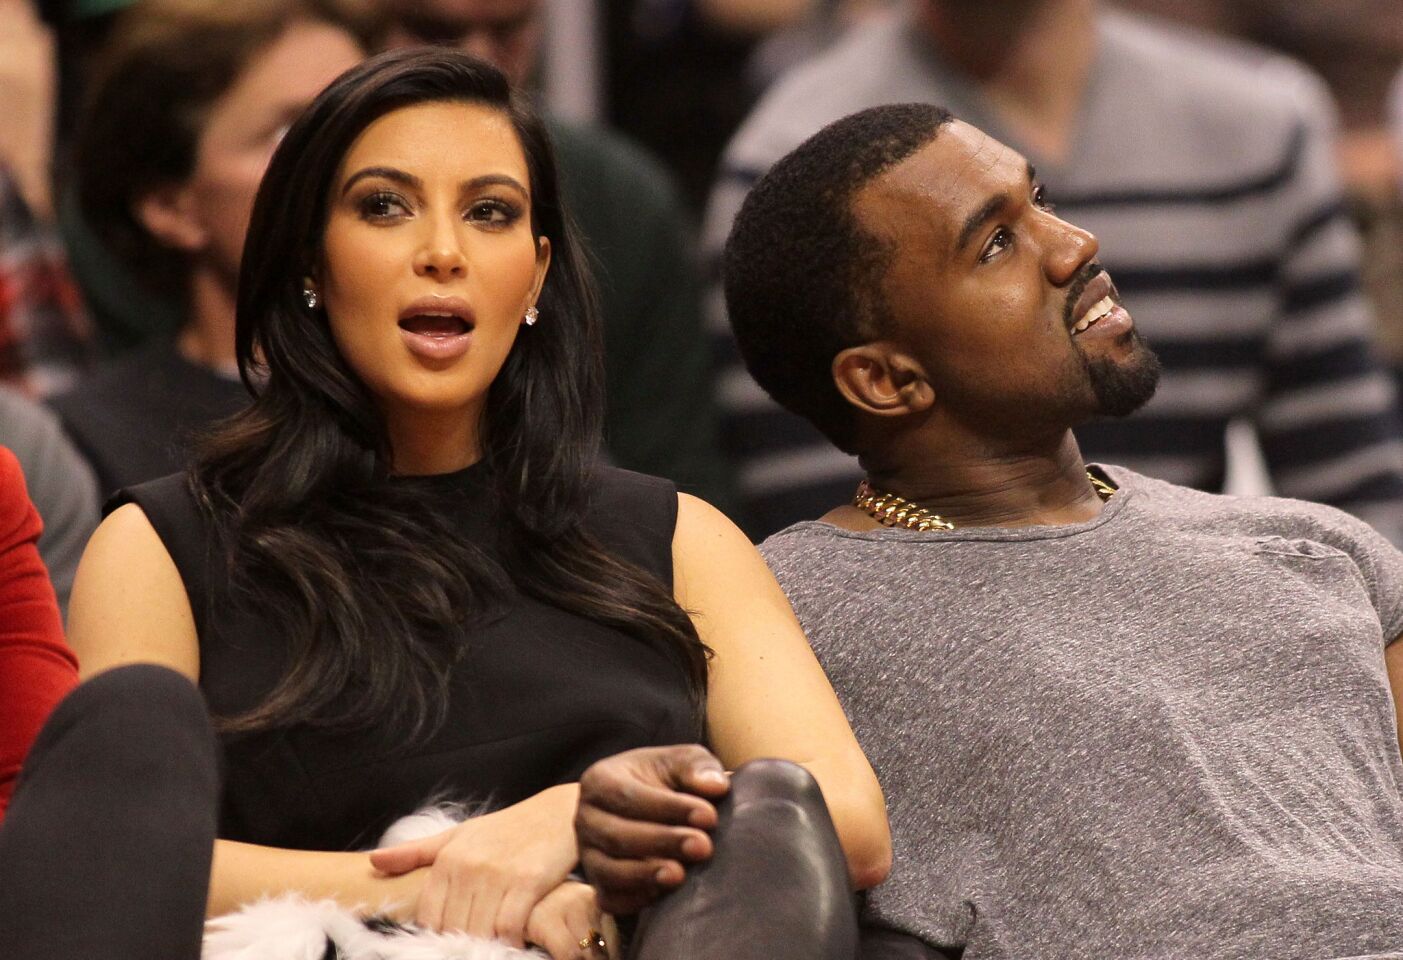 Kim Kardashian and Kanye West attend the NBA game between the Clippers and the Denver Nuggets at Staples Center on Dec. 25, 2012.